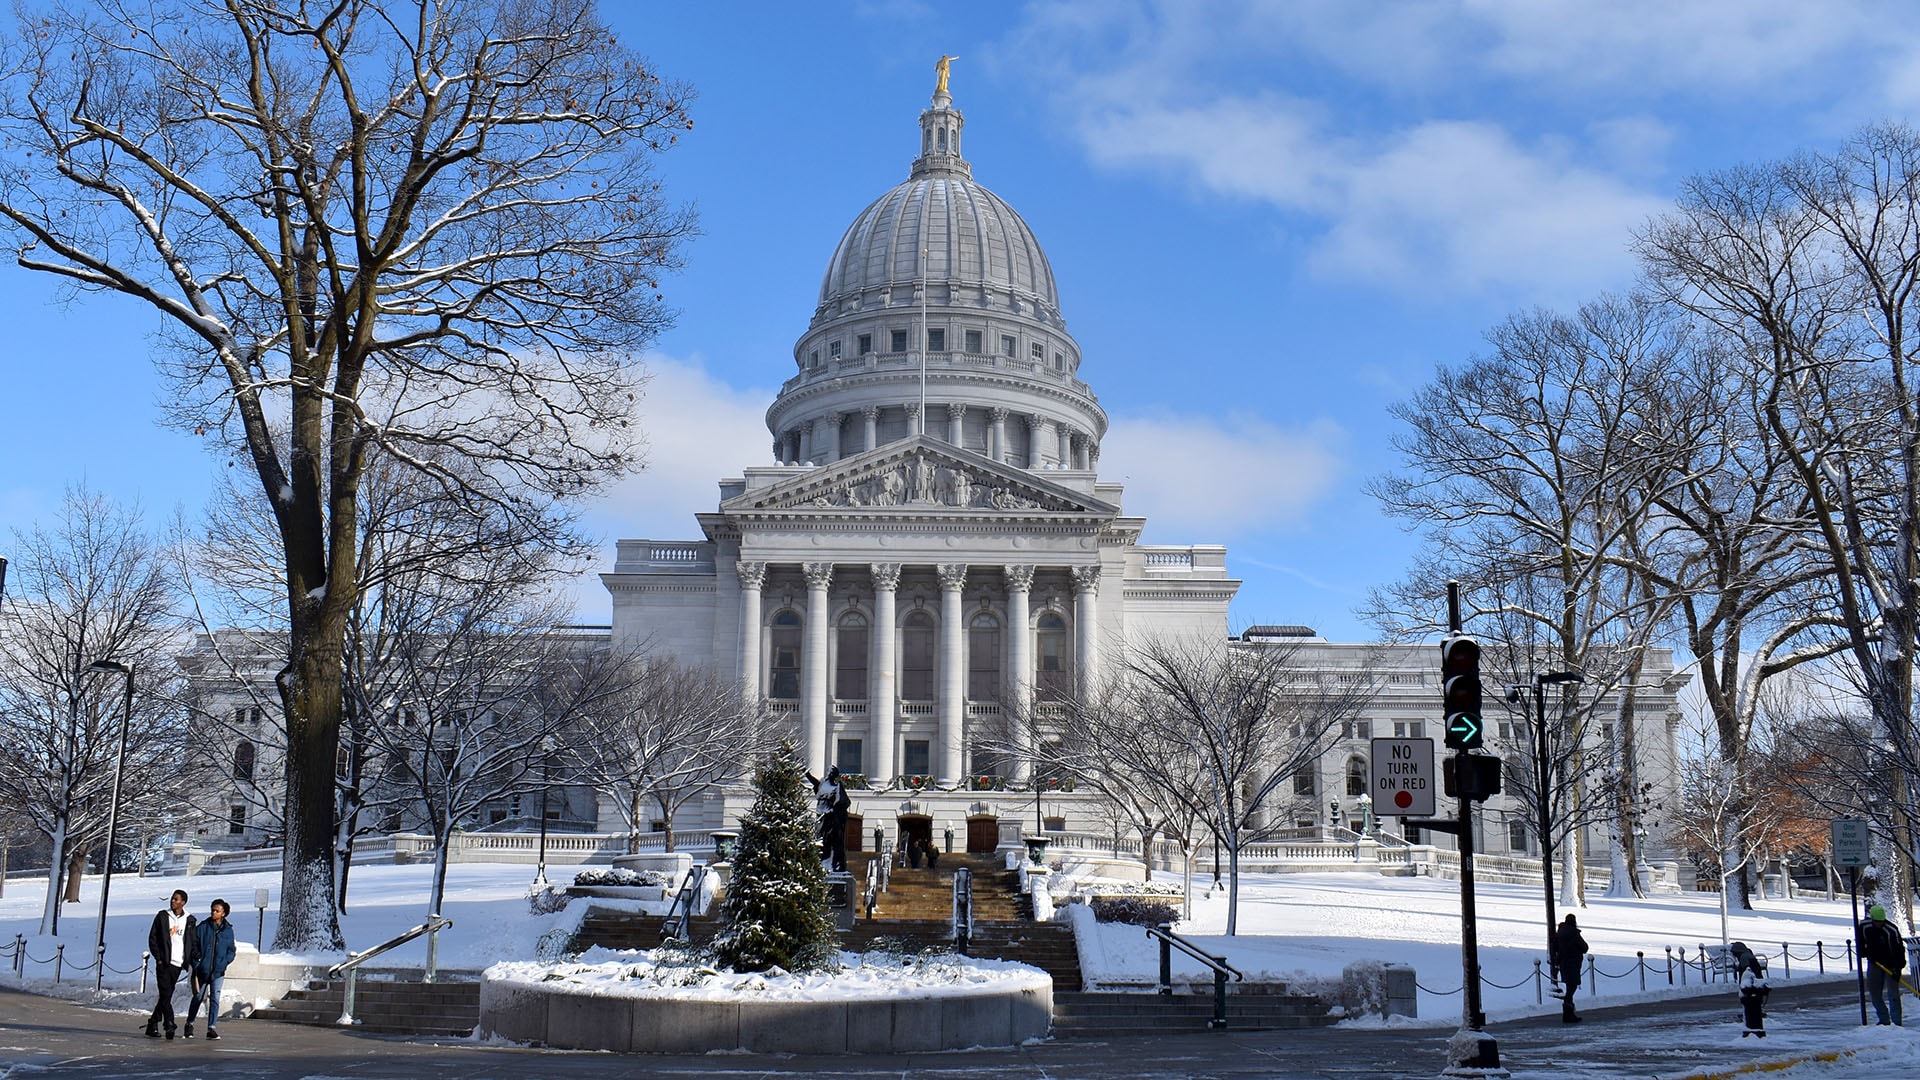 The Wisconsin State Capitol is beautiful in all seasons, though the warm interior is especially inviting in winter.